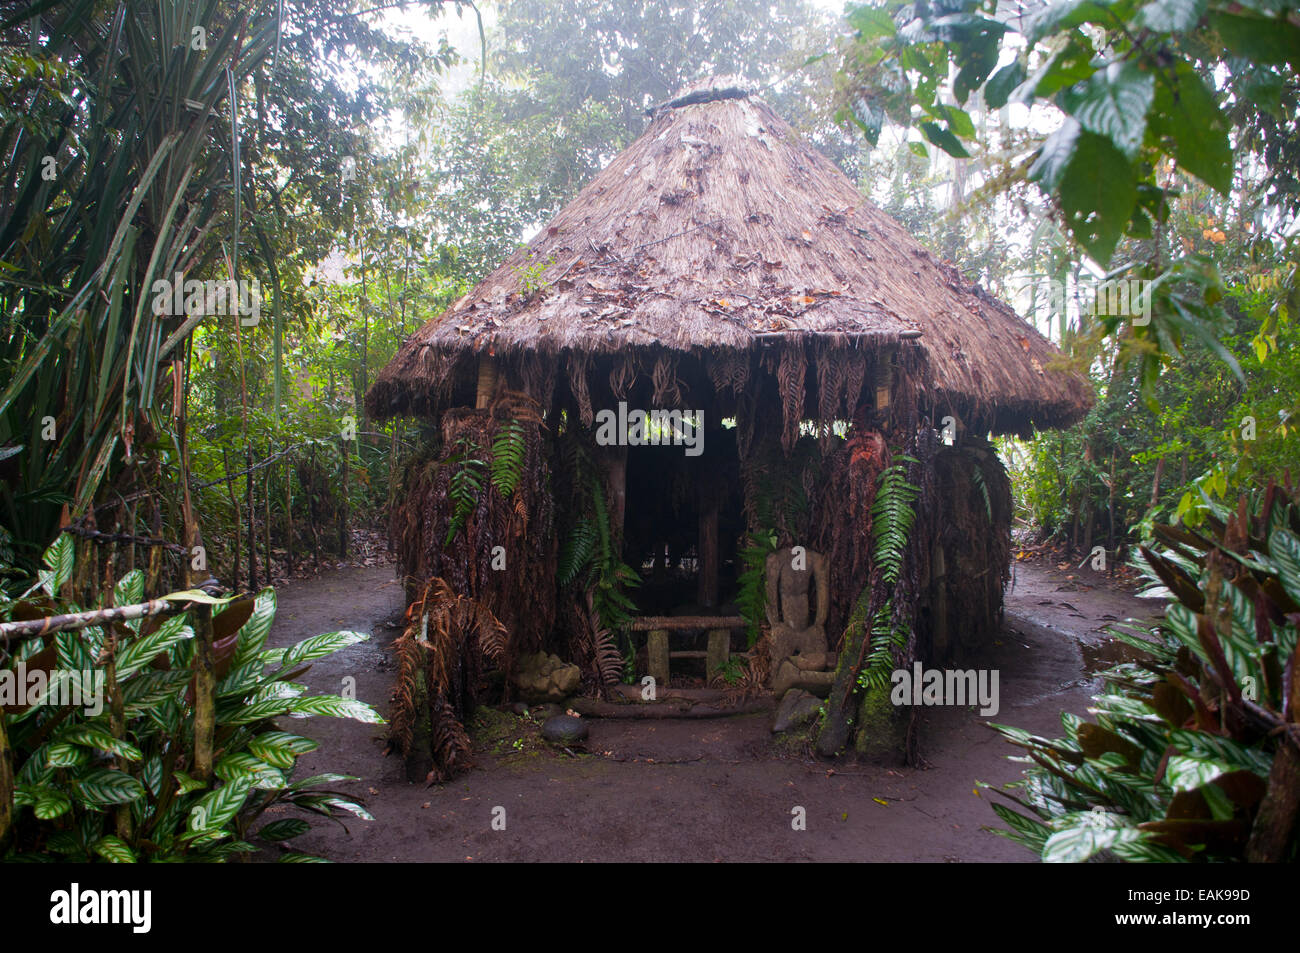 Hut in a tribal village, Highlands, Papua New Guinea Stock Photo